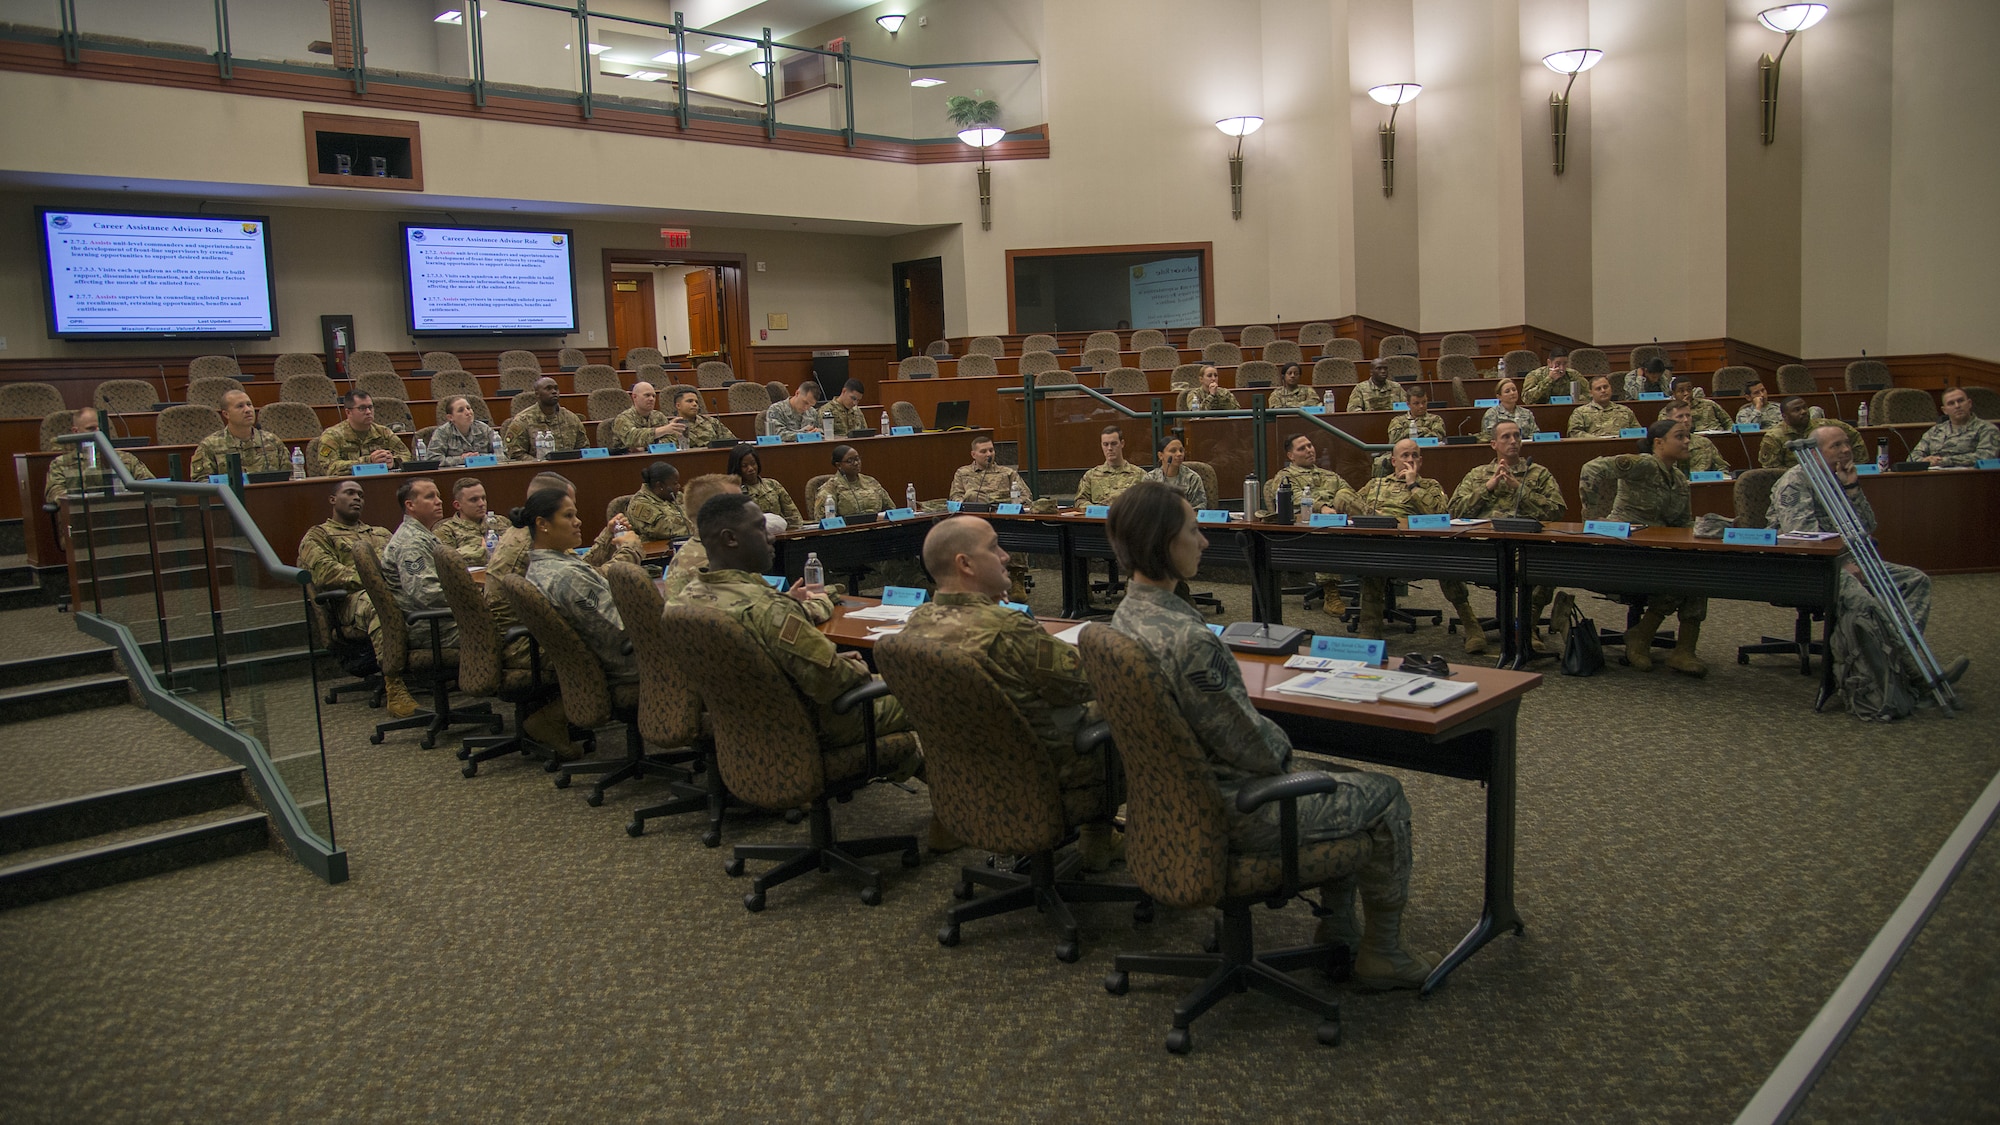 Students listen to a lecture during the SNCO Professional Enhancement Seminar at MacDill Air Force Base, Fla., Aug. 2, 2019. This professional enhancement seminar is a week-long, discussion-led training course that prepares Airmen for their new SNCO responsibilities.